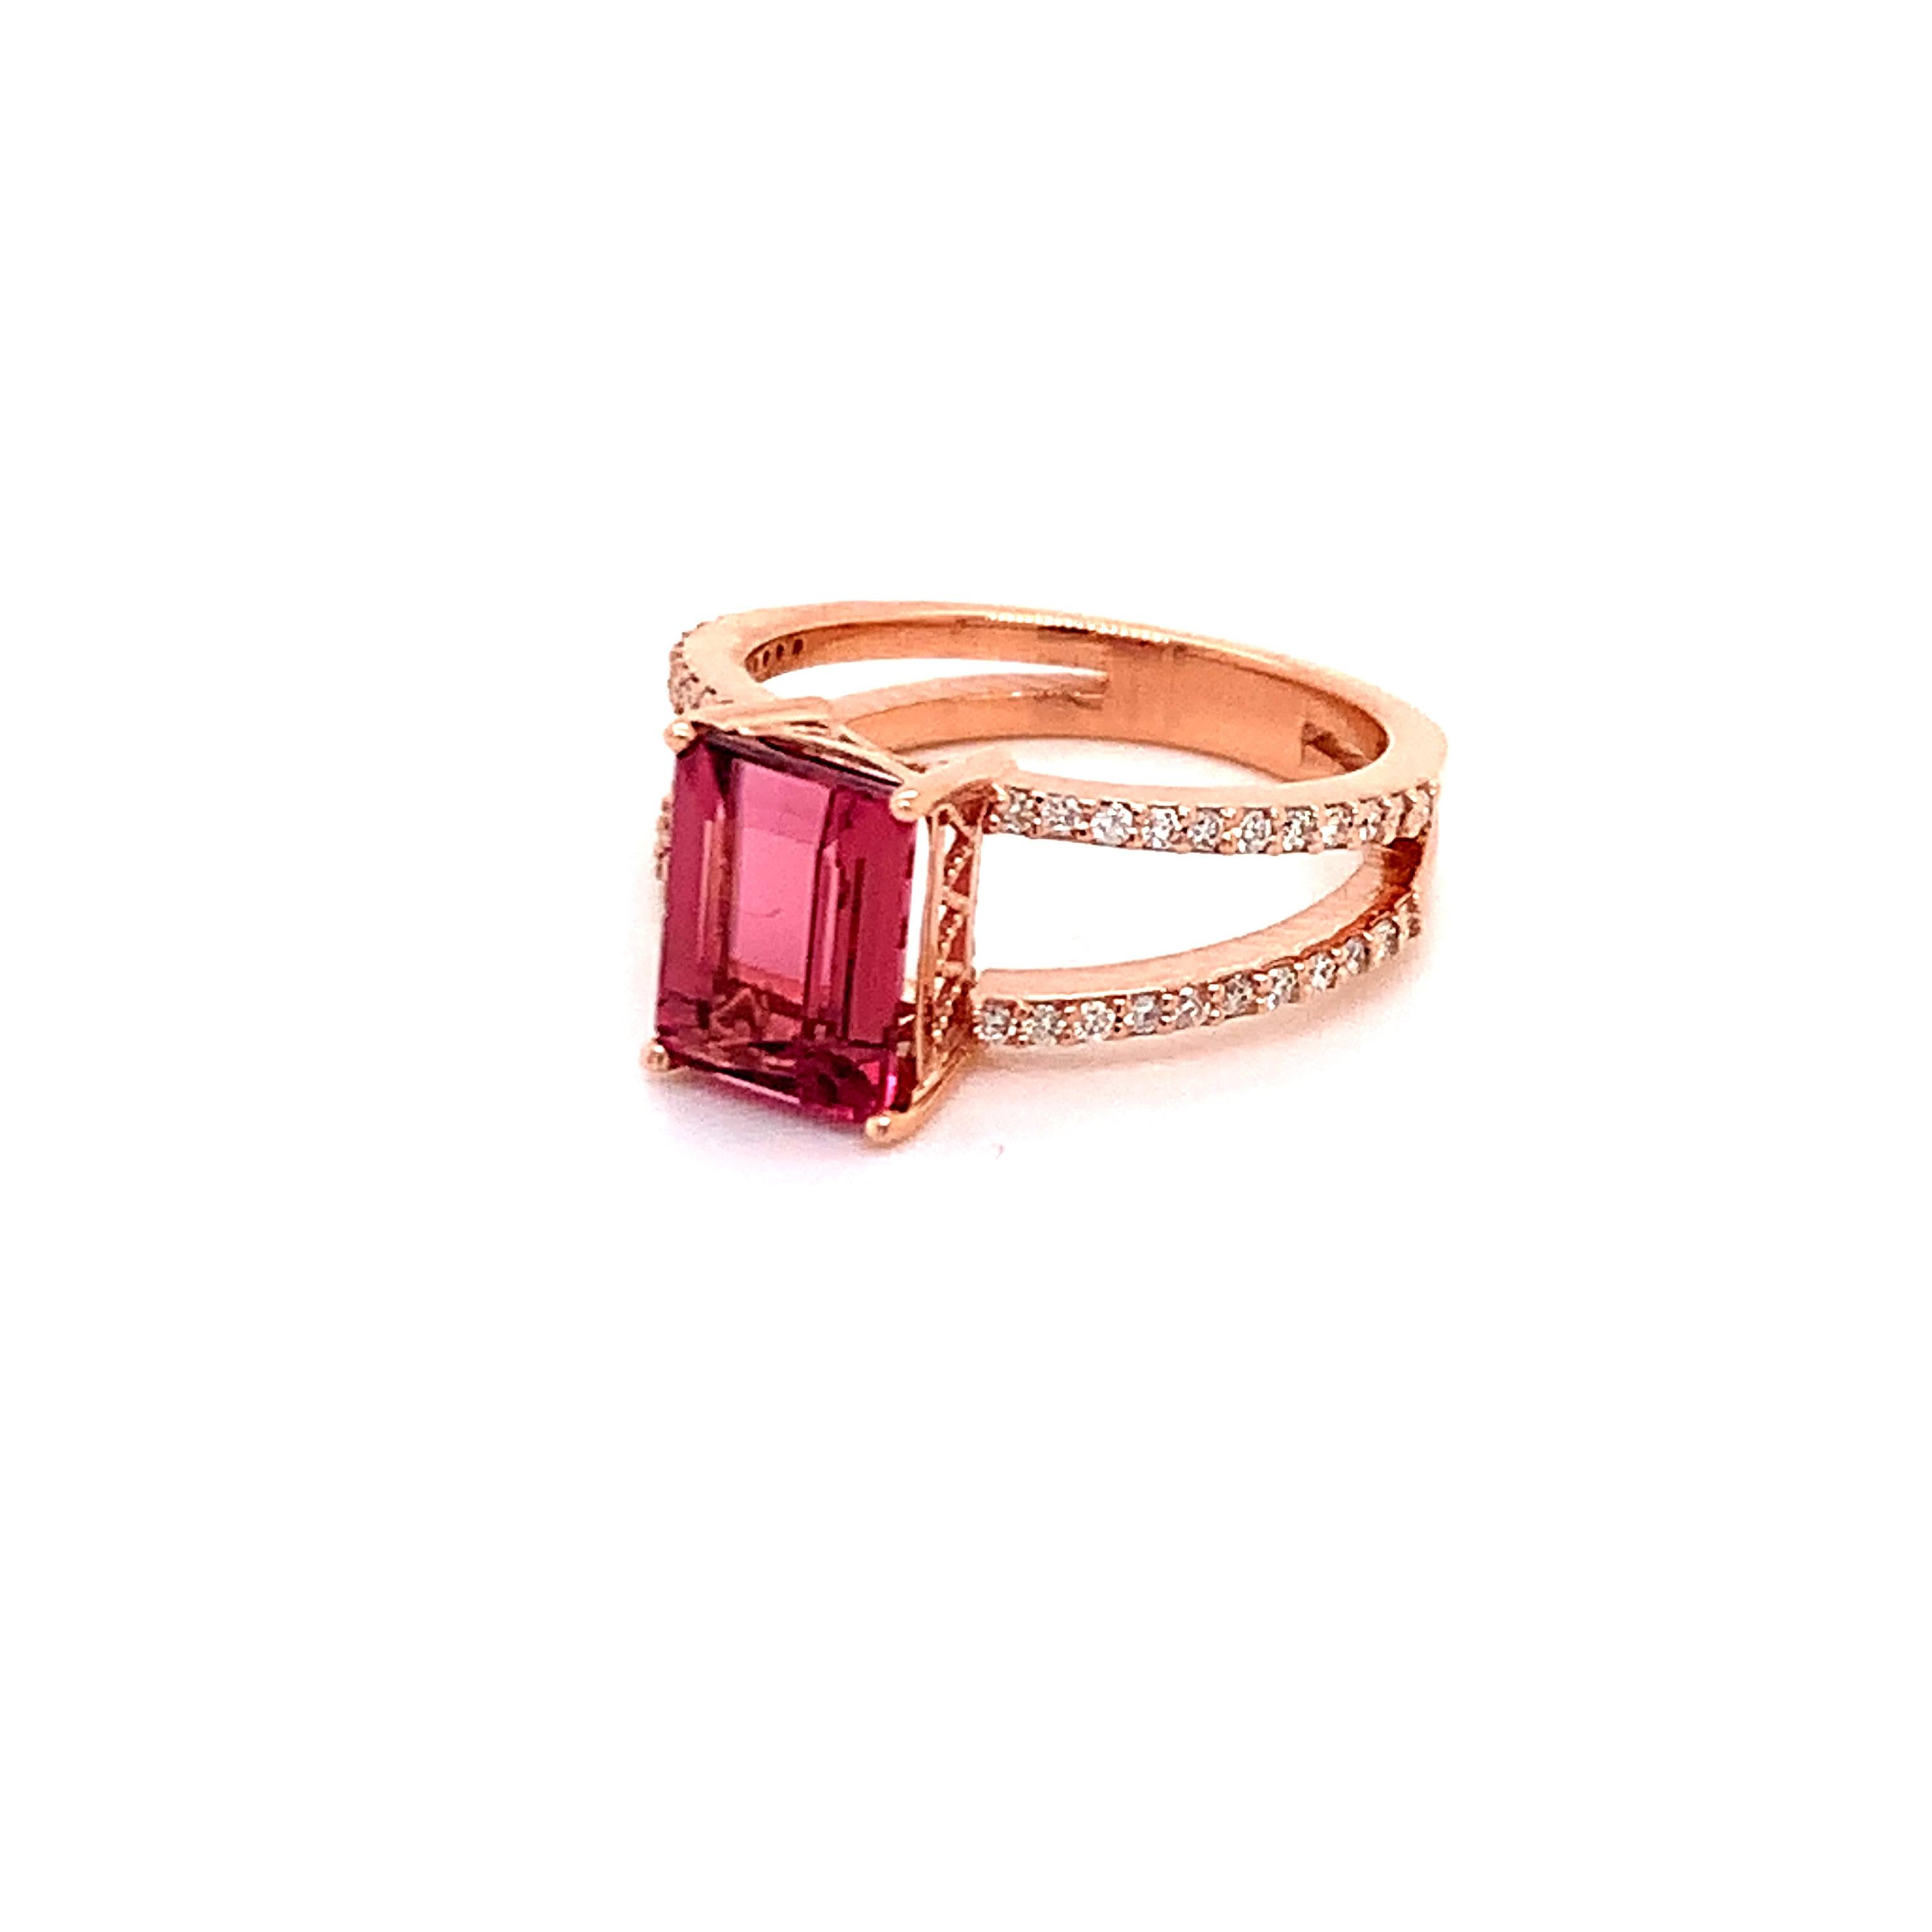 Natural Tourmaline Diamond Ring 14k Rose Gold 2.2 TCW Certified For Sale 9